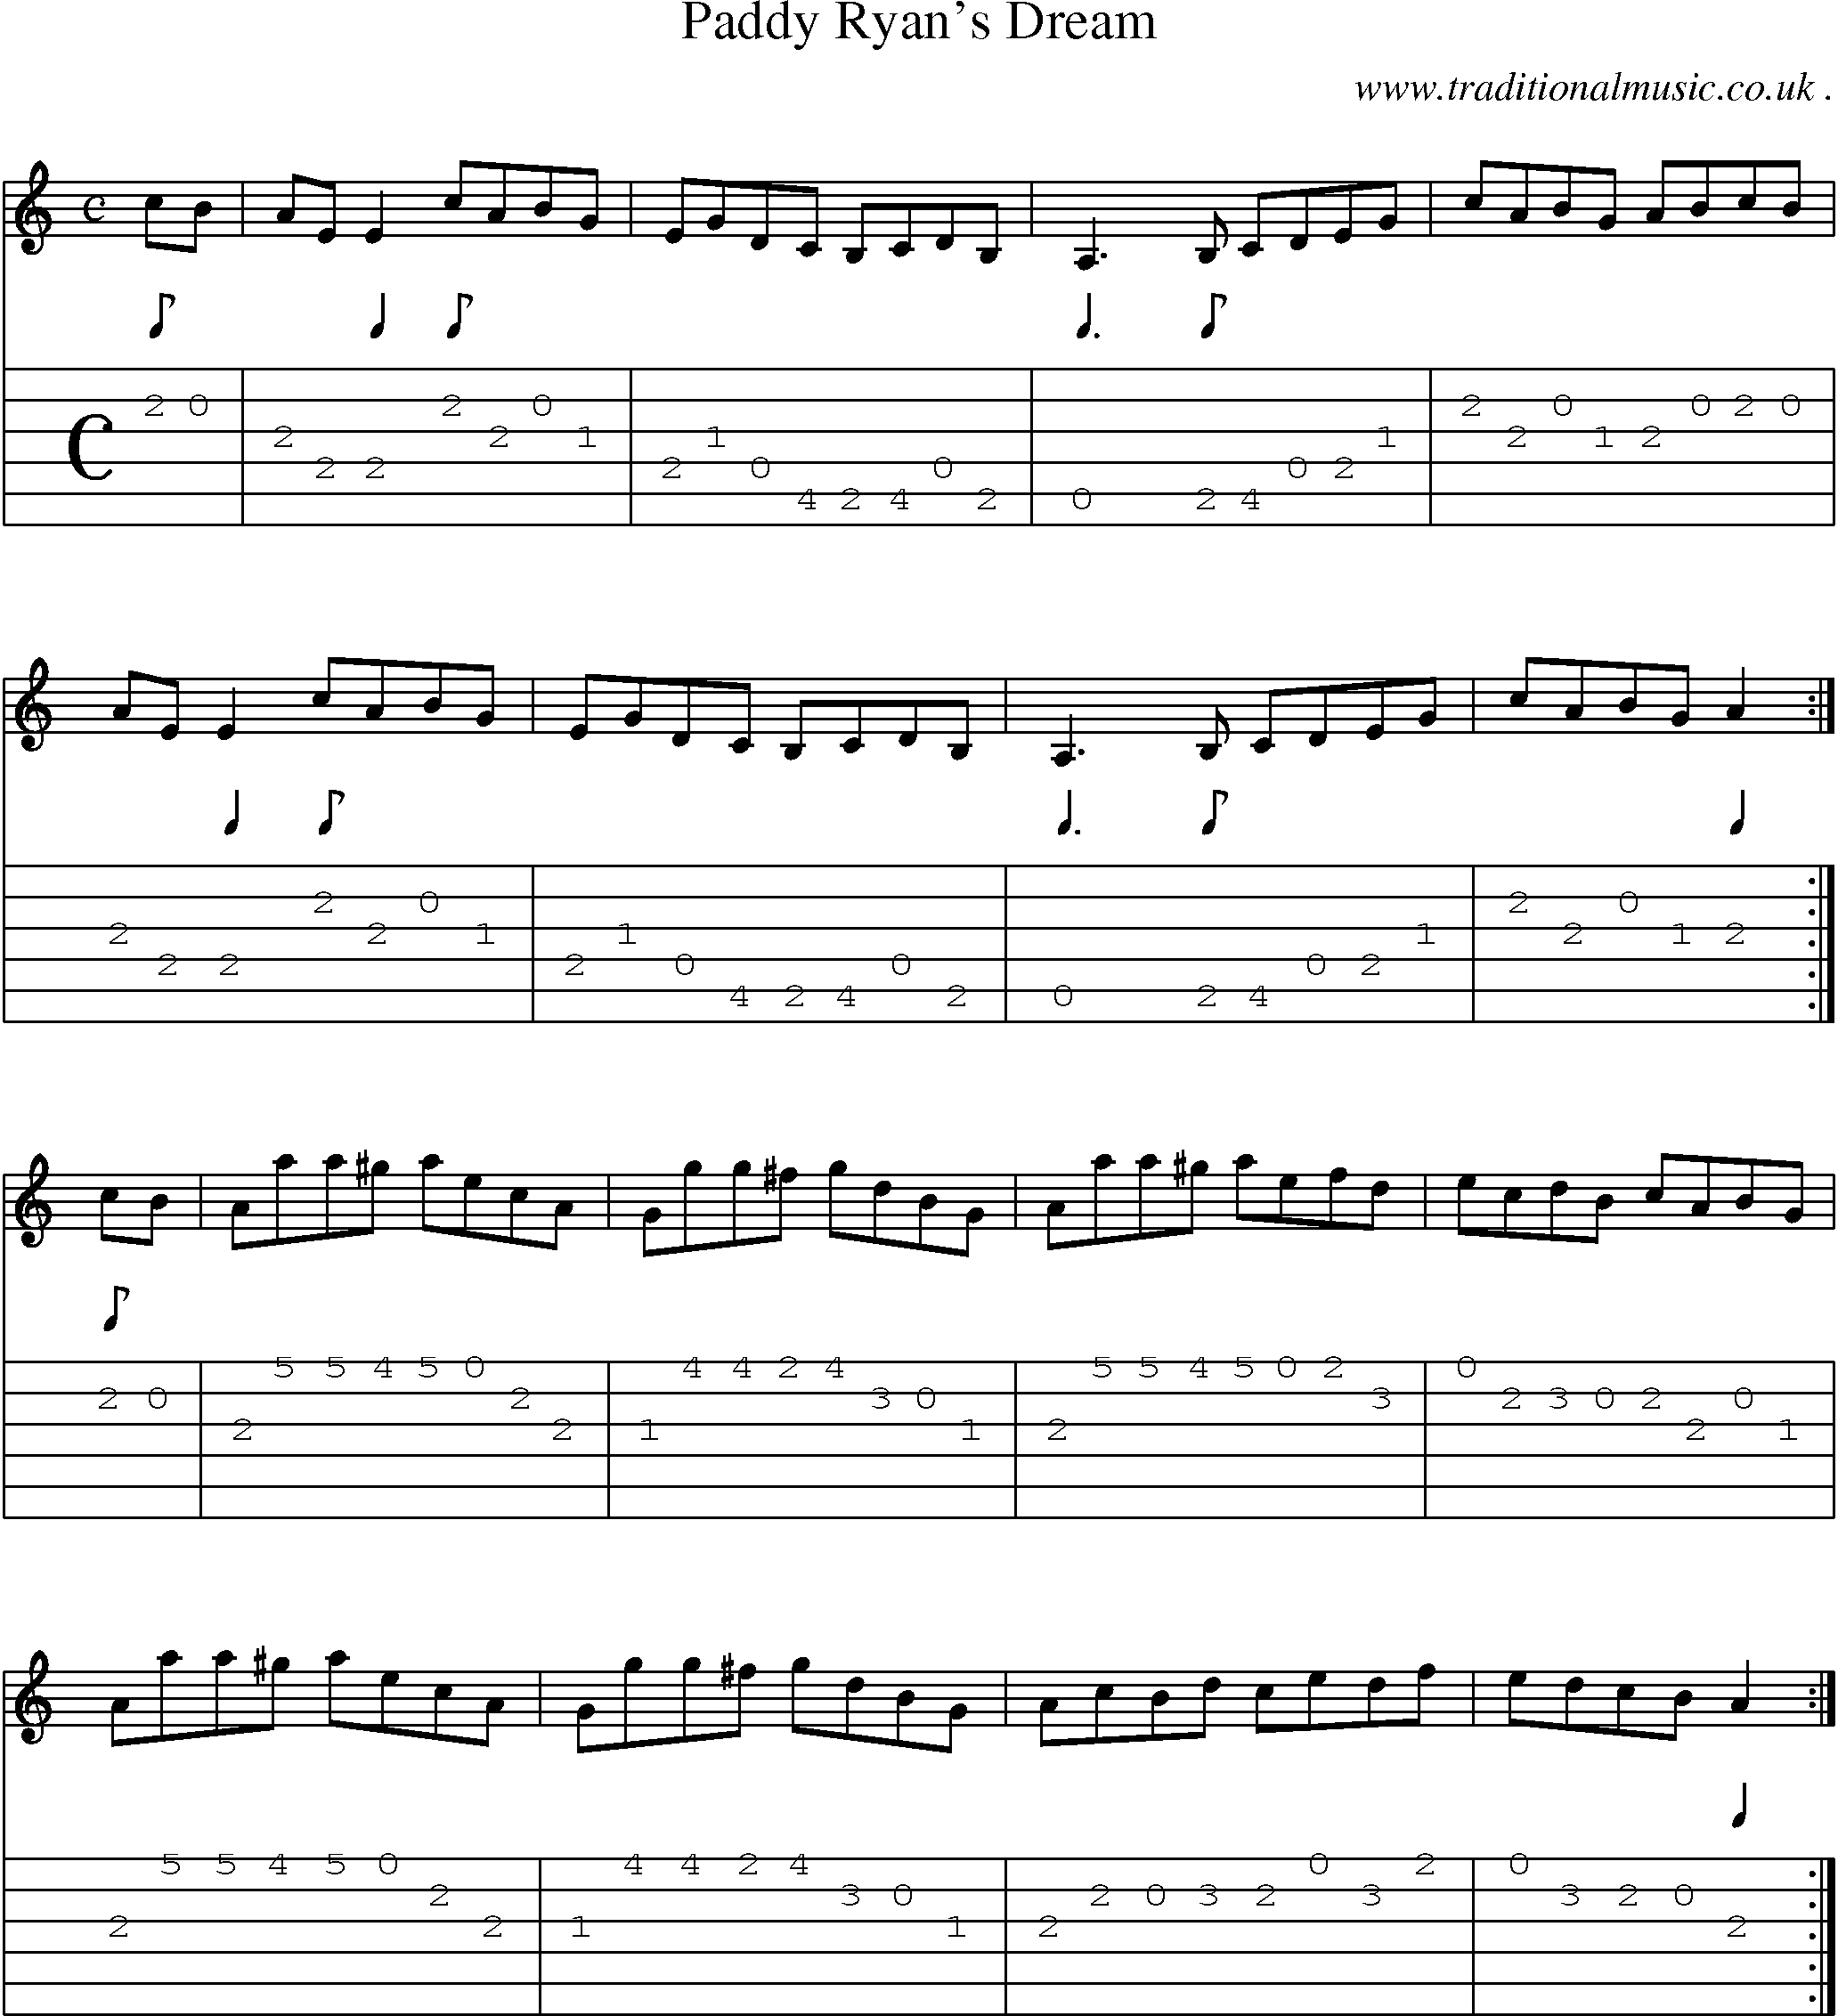 Sheet-Music and Guitar Tabs for Paddy Ryans Dream